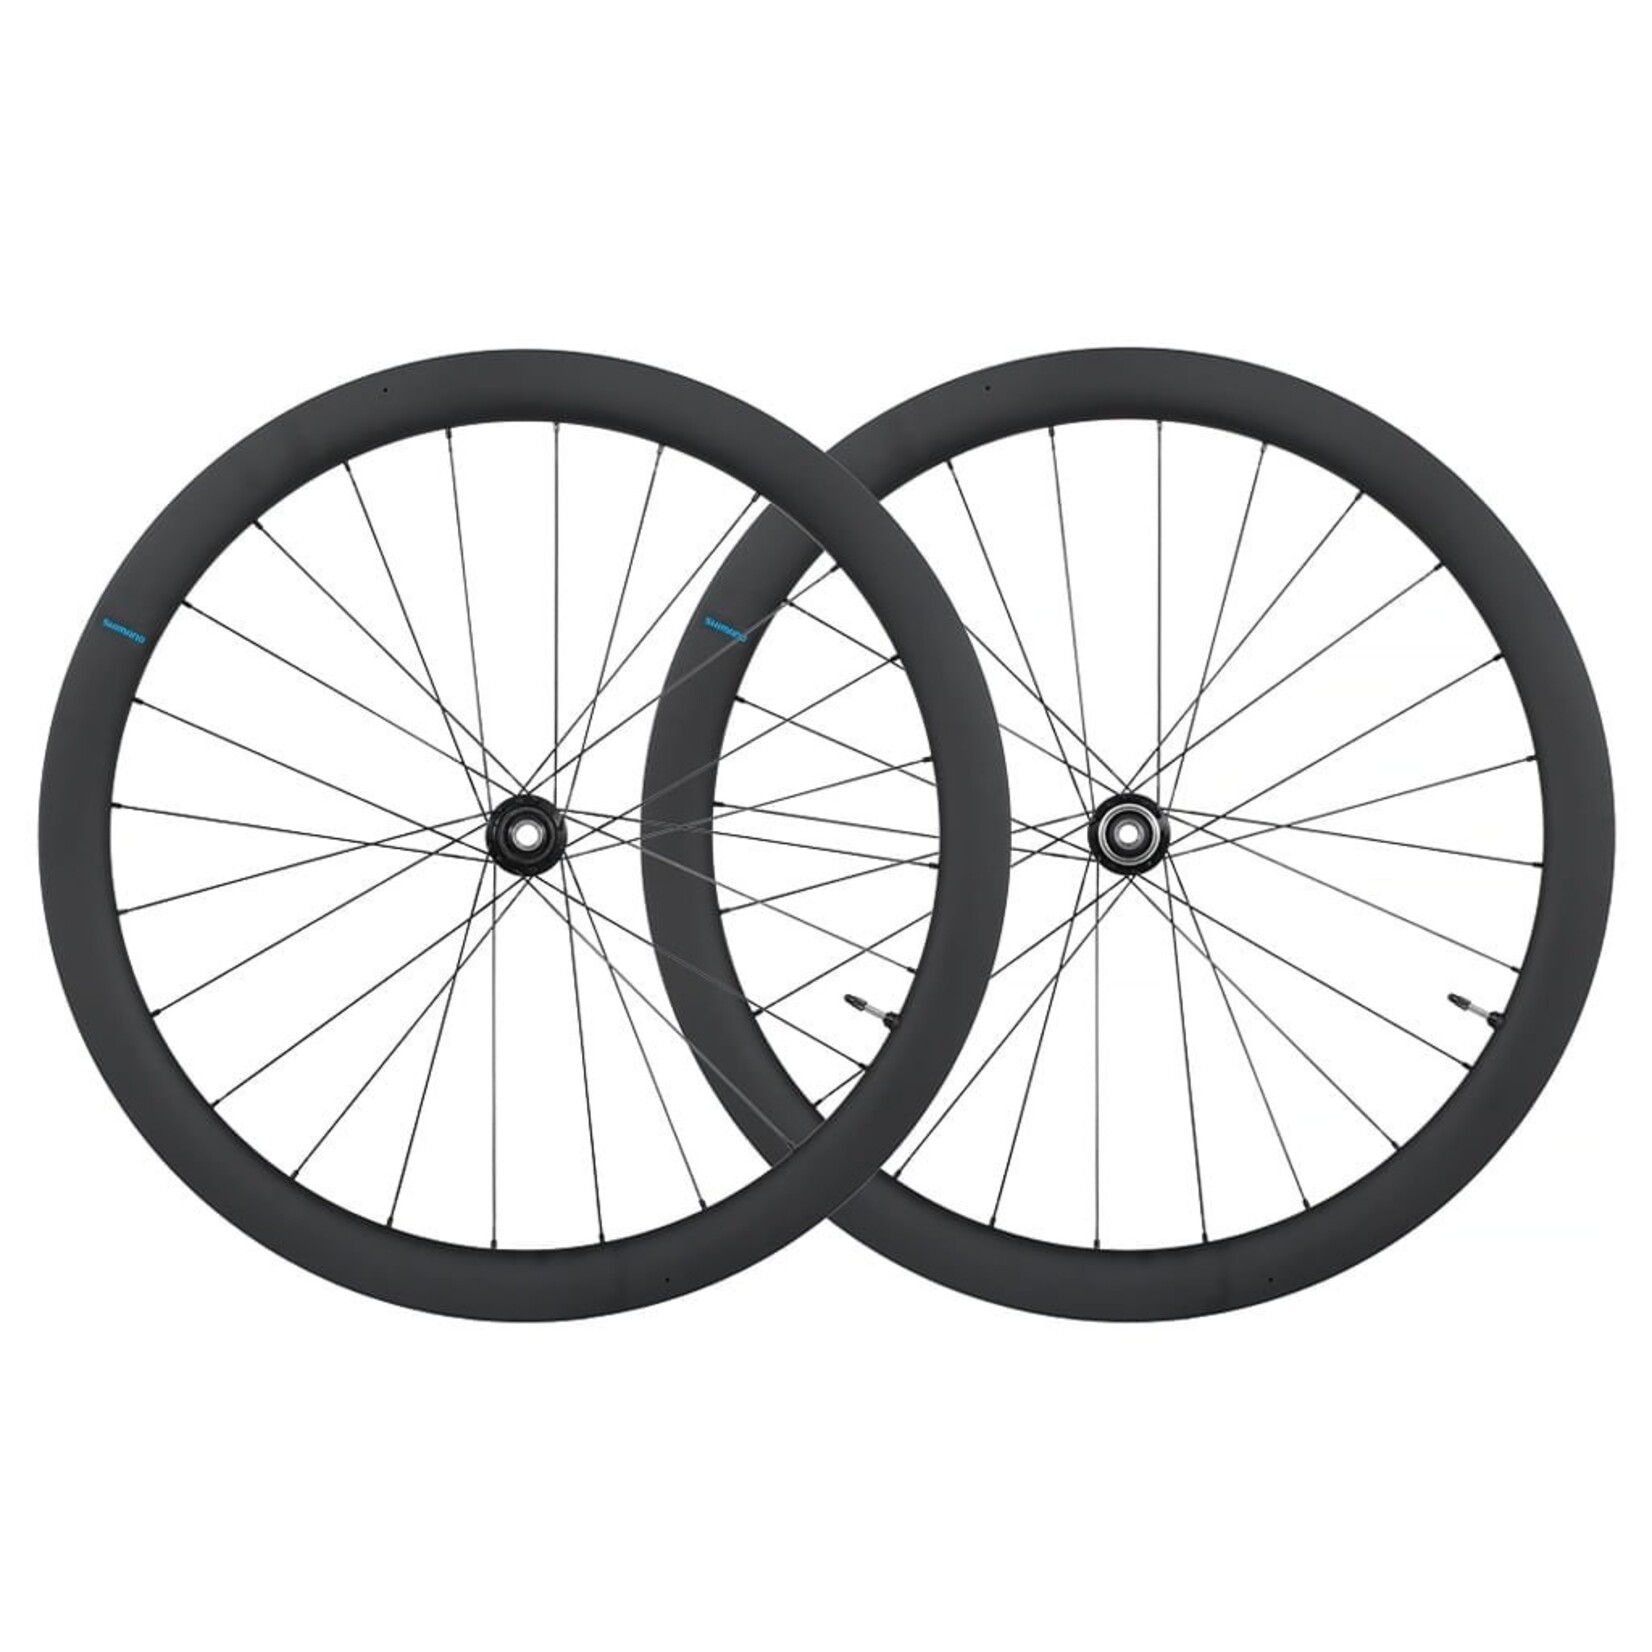 Shimano 105 C46 Carbon Tubeless Disc Wheelset, WH-RS710-C46-TL